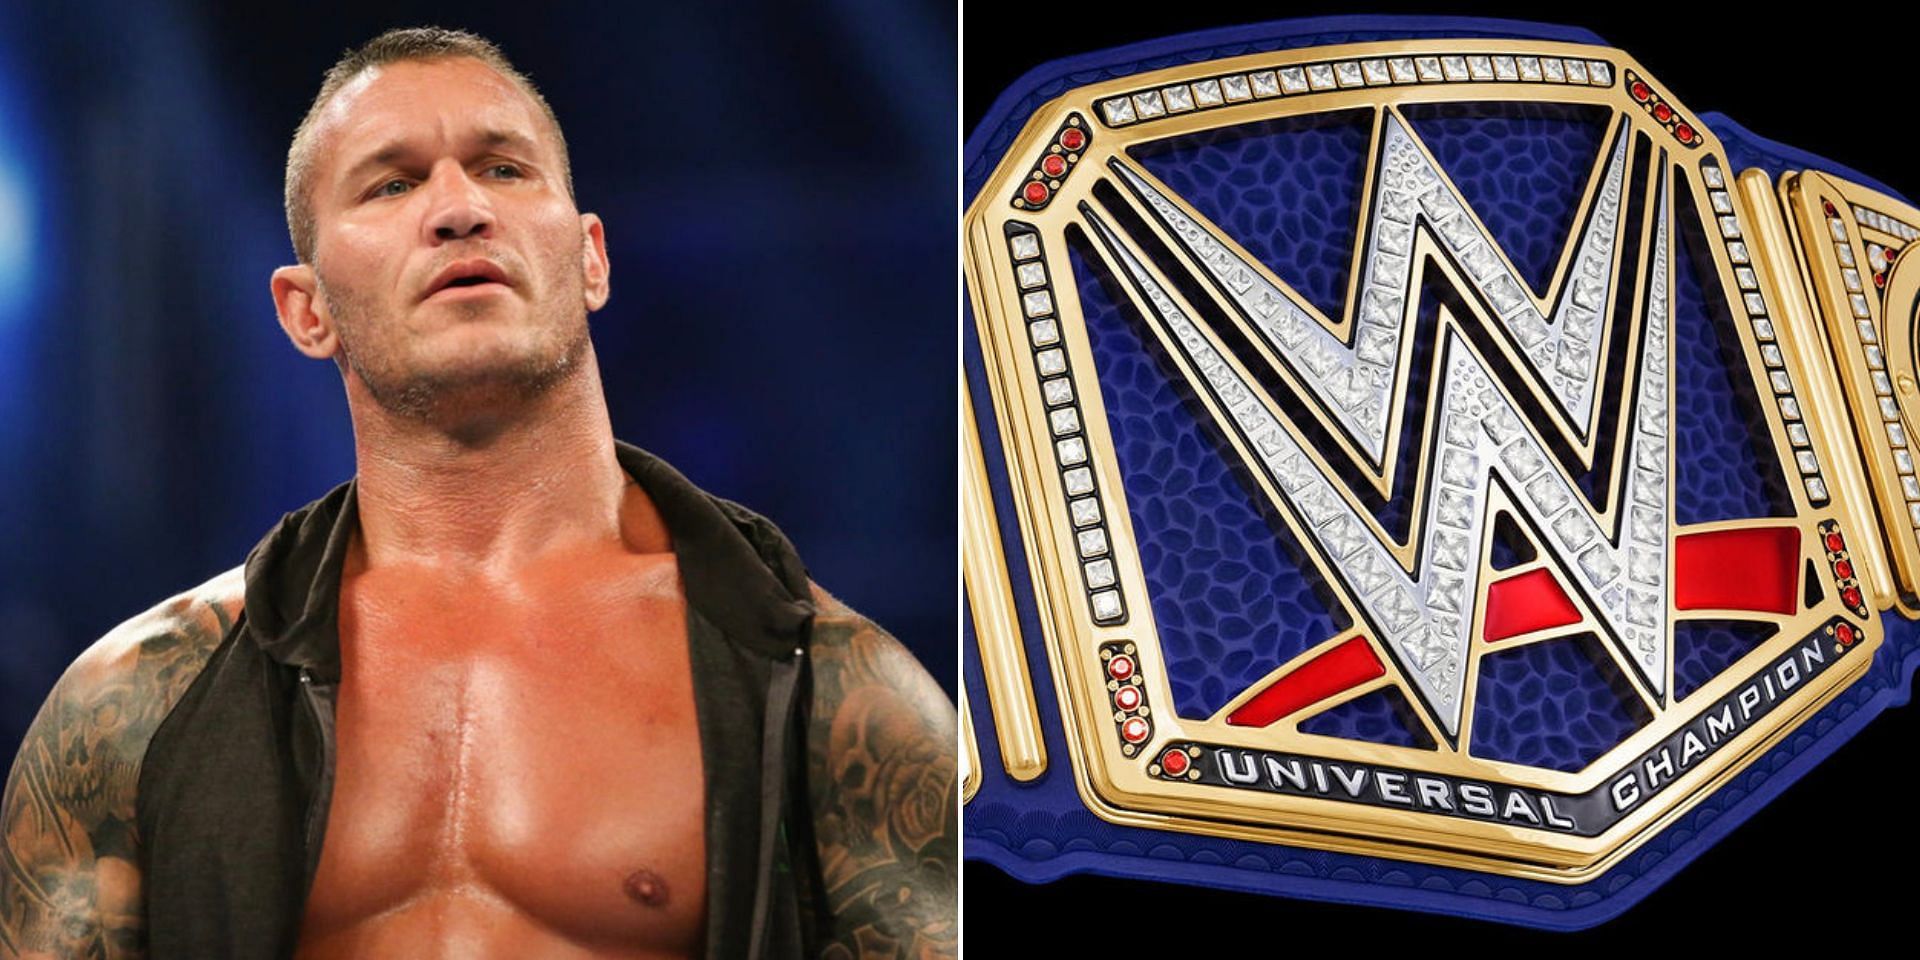 Randy Orton will team up with a former Universal Champion